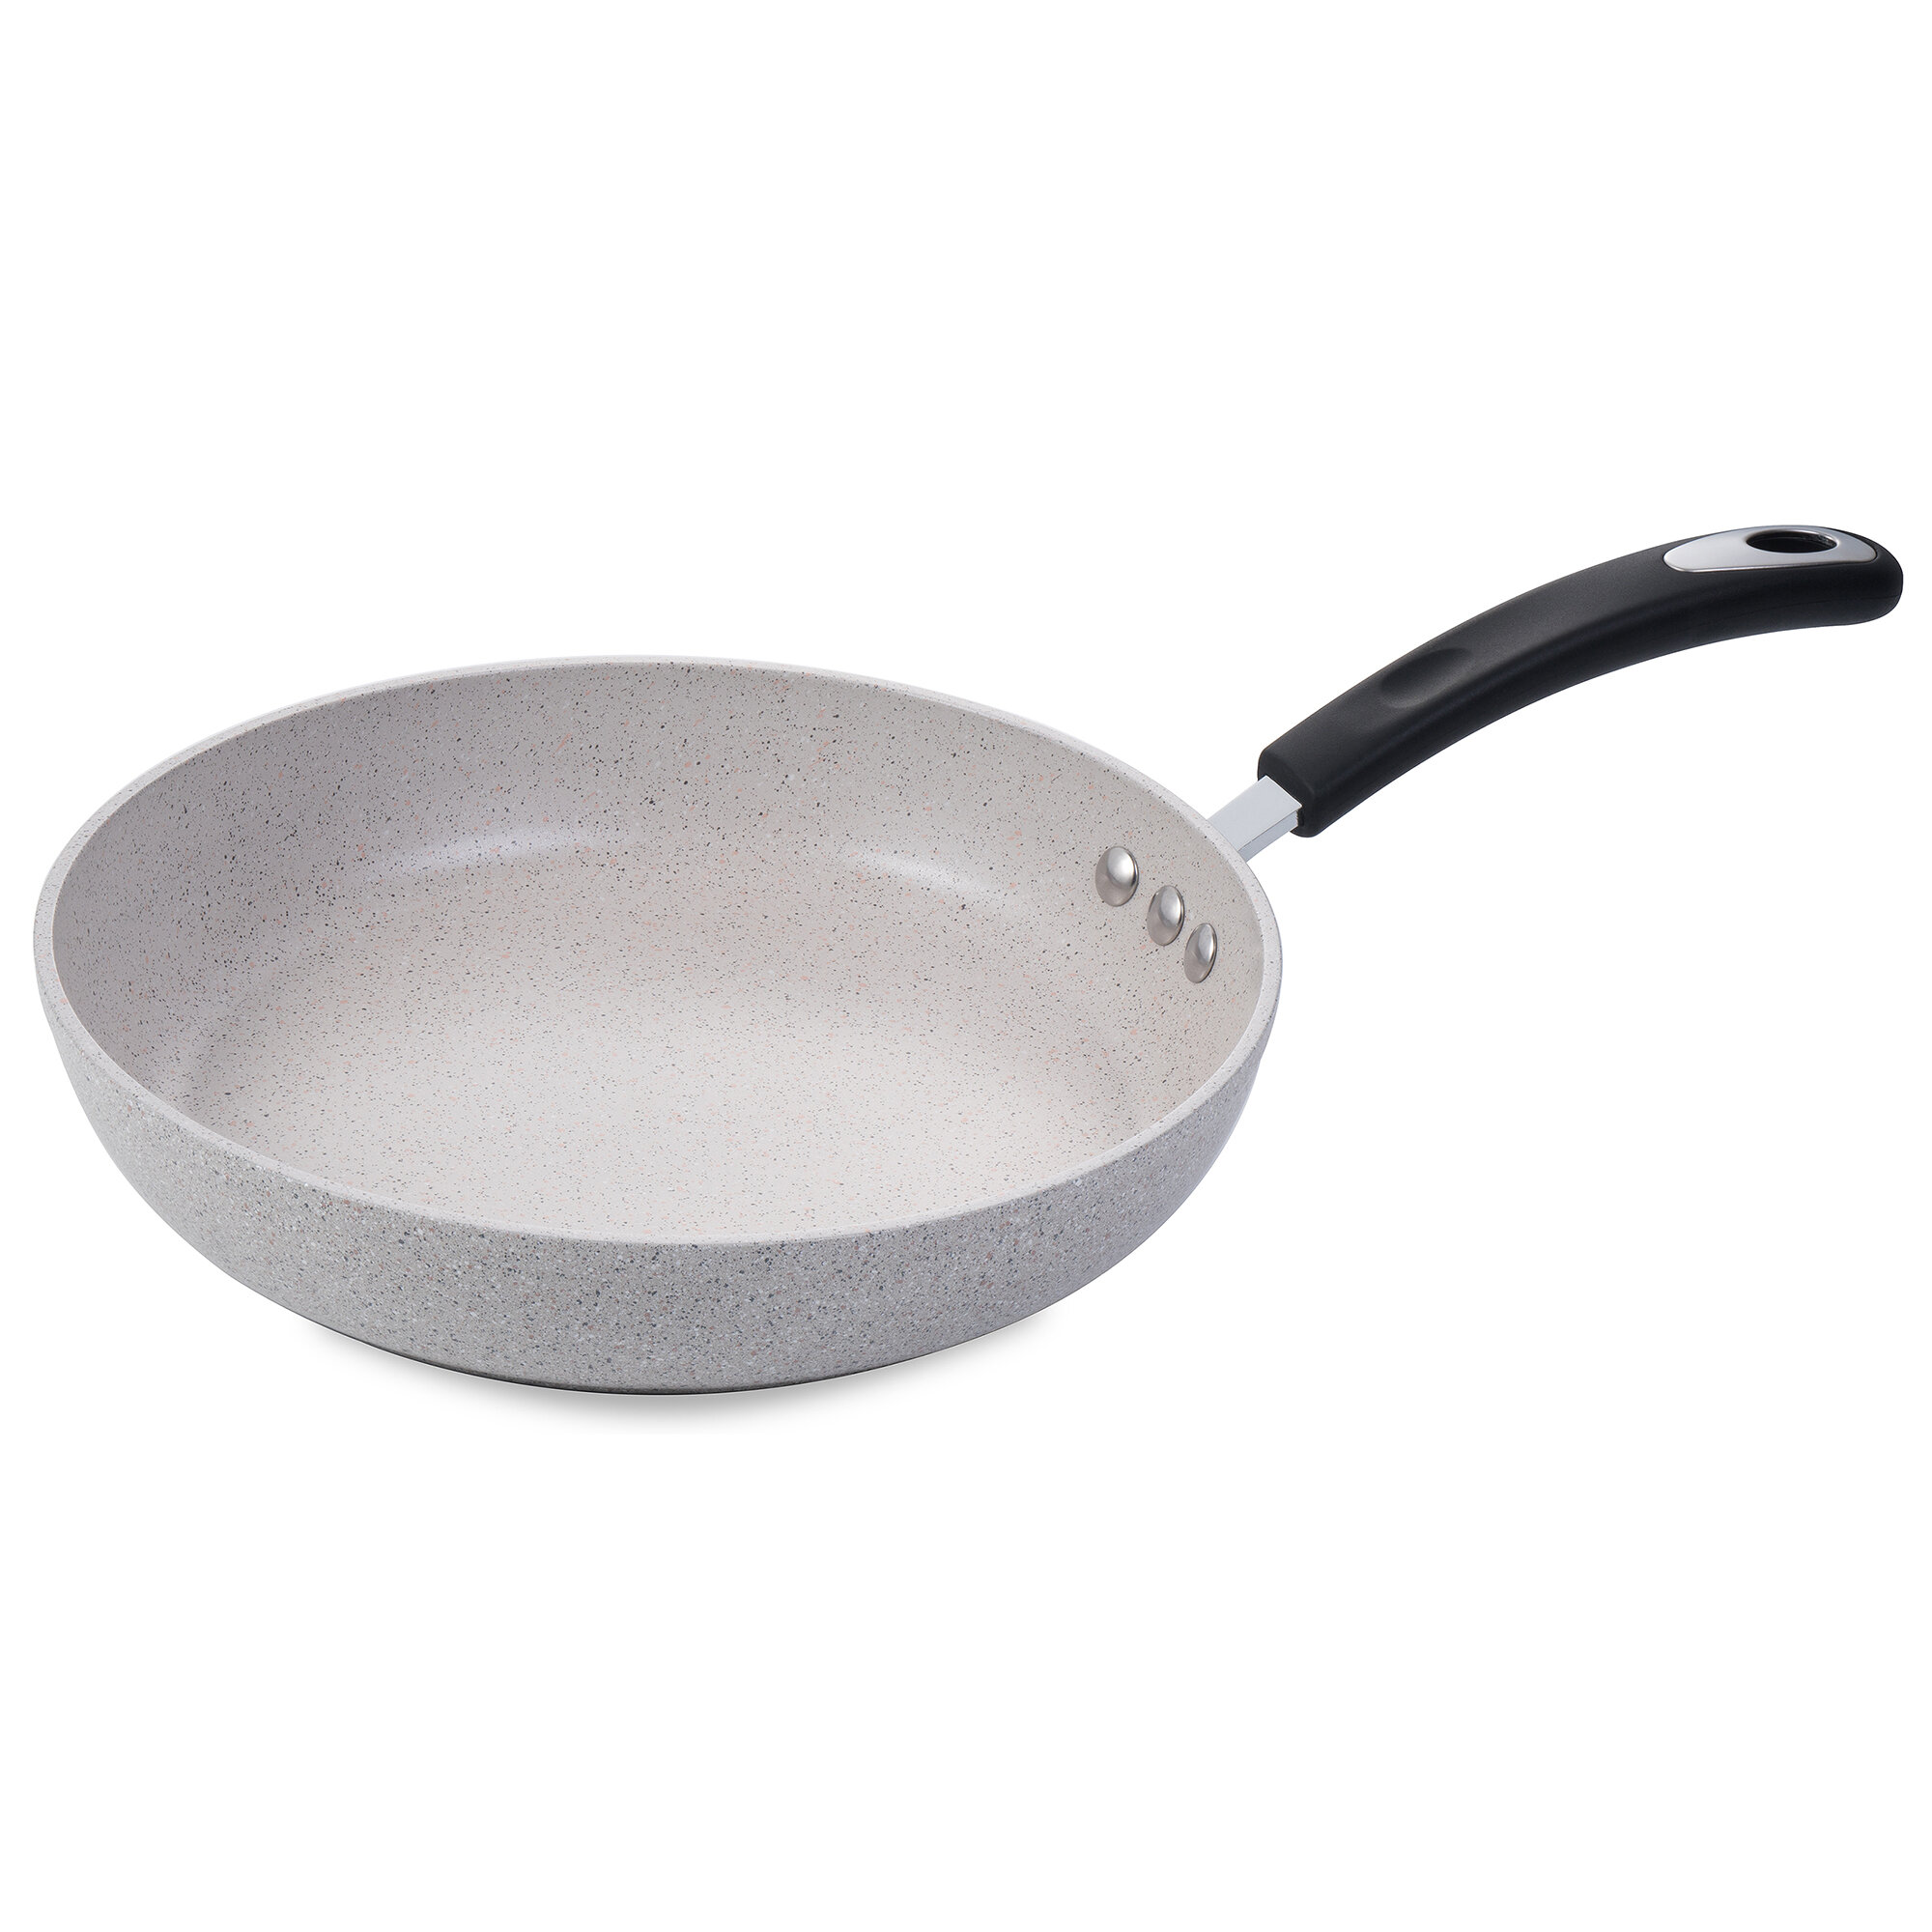 10 Stone Earth Frying Pan by Ozeri, with 100% APEO & PFOA-Free Stone-Derived Non-Stick Coating from Germany